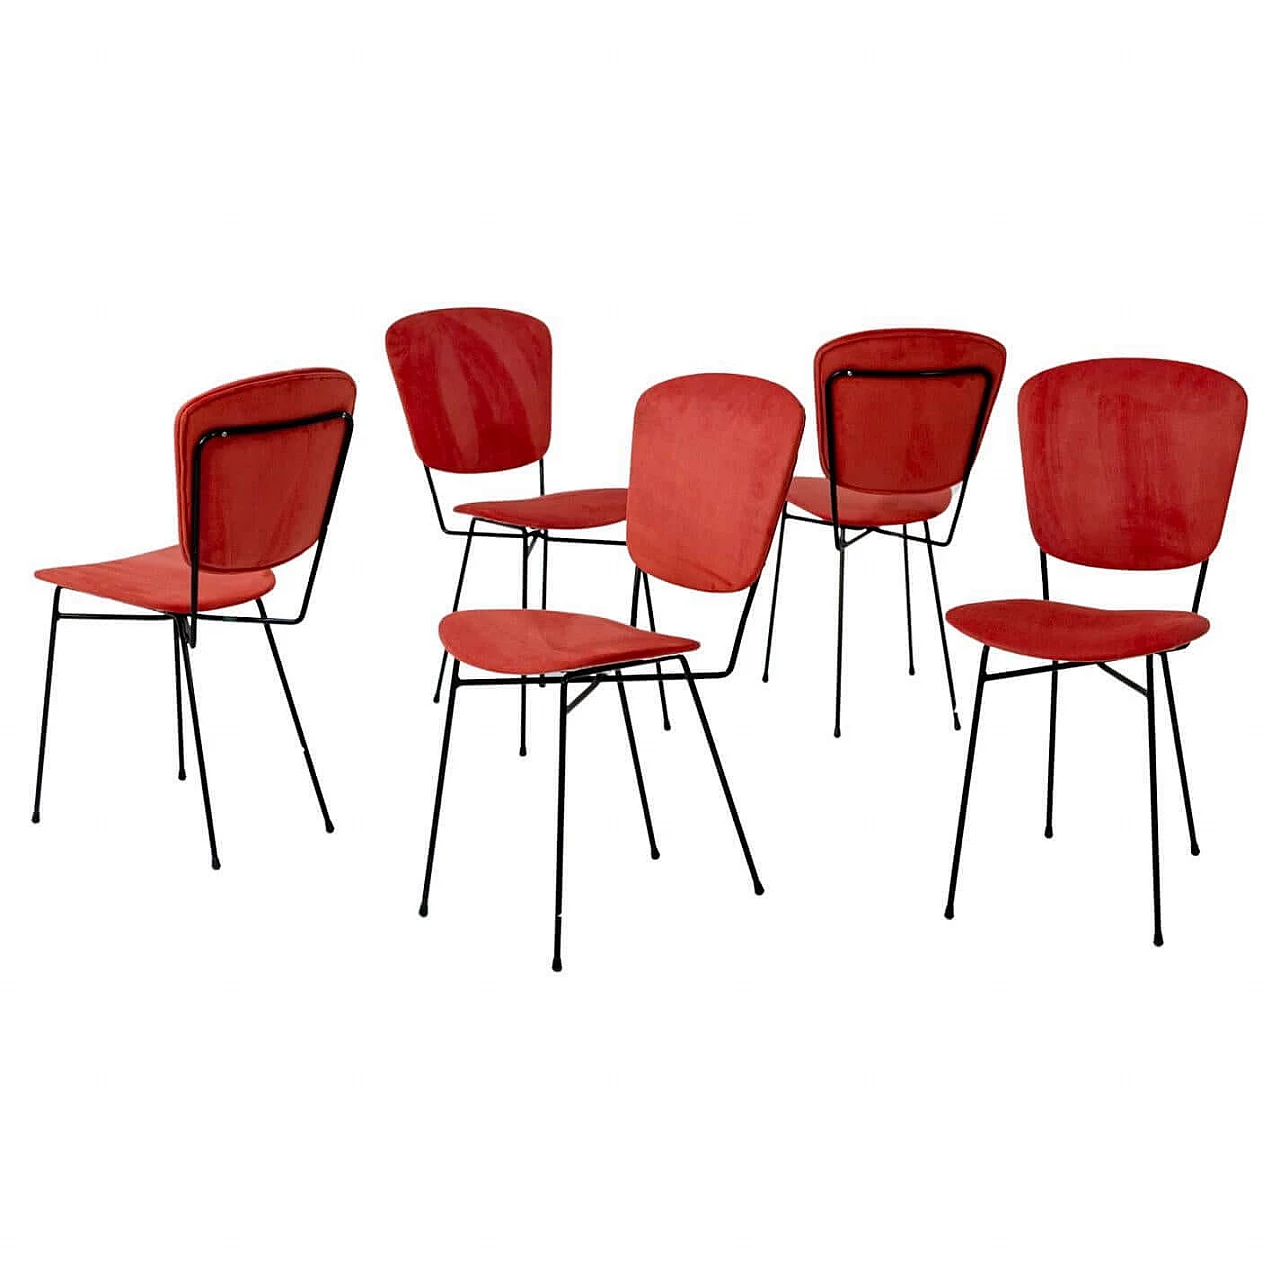 5 Chairs produced by Doro Cuneo in iron and red cotton, 1960s 1405500